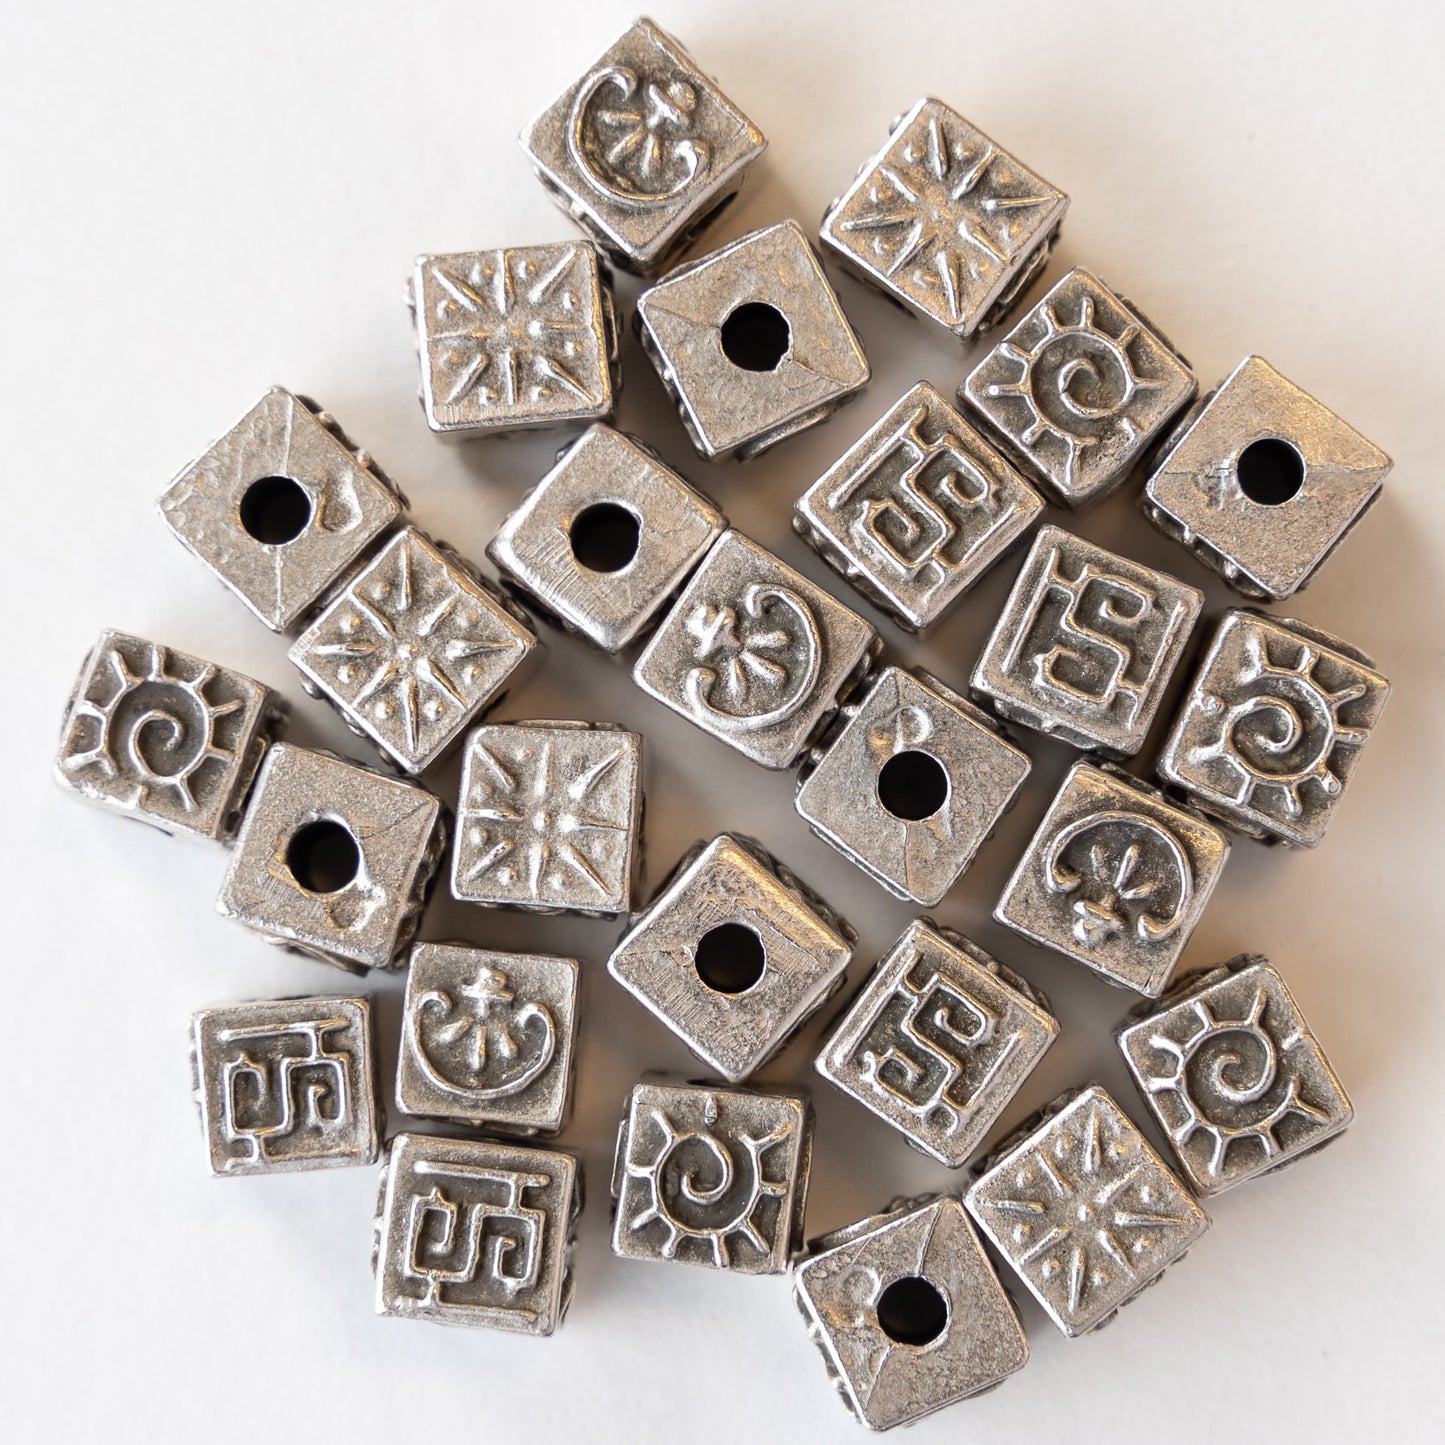 9mm Cube Beads with Design Beads - Pewter - 6 cubes